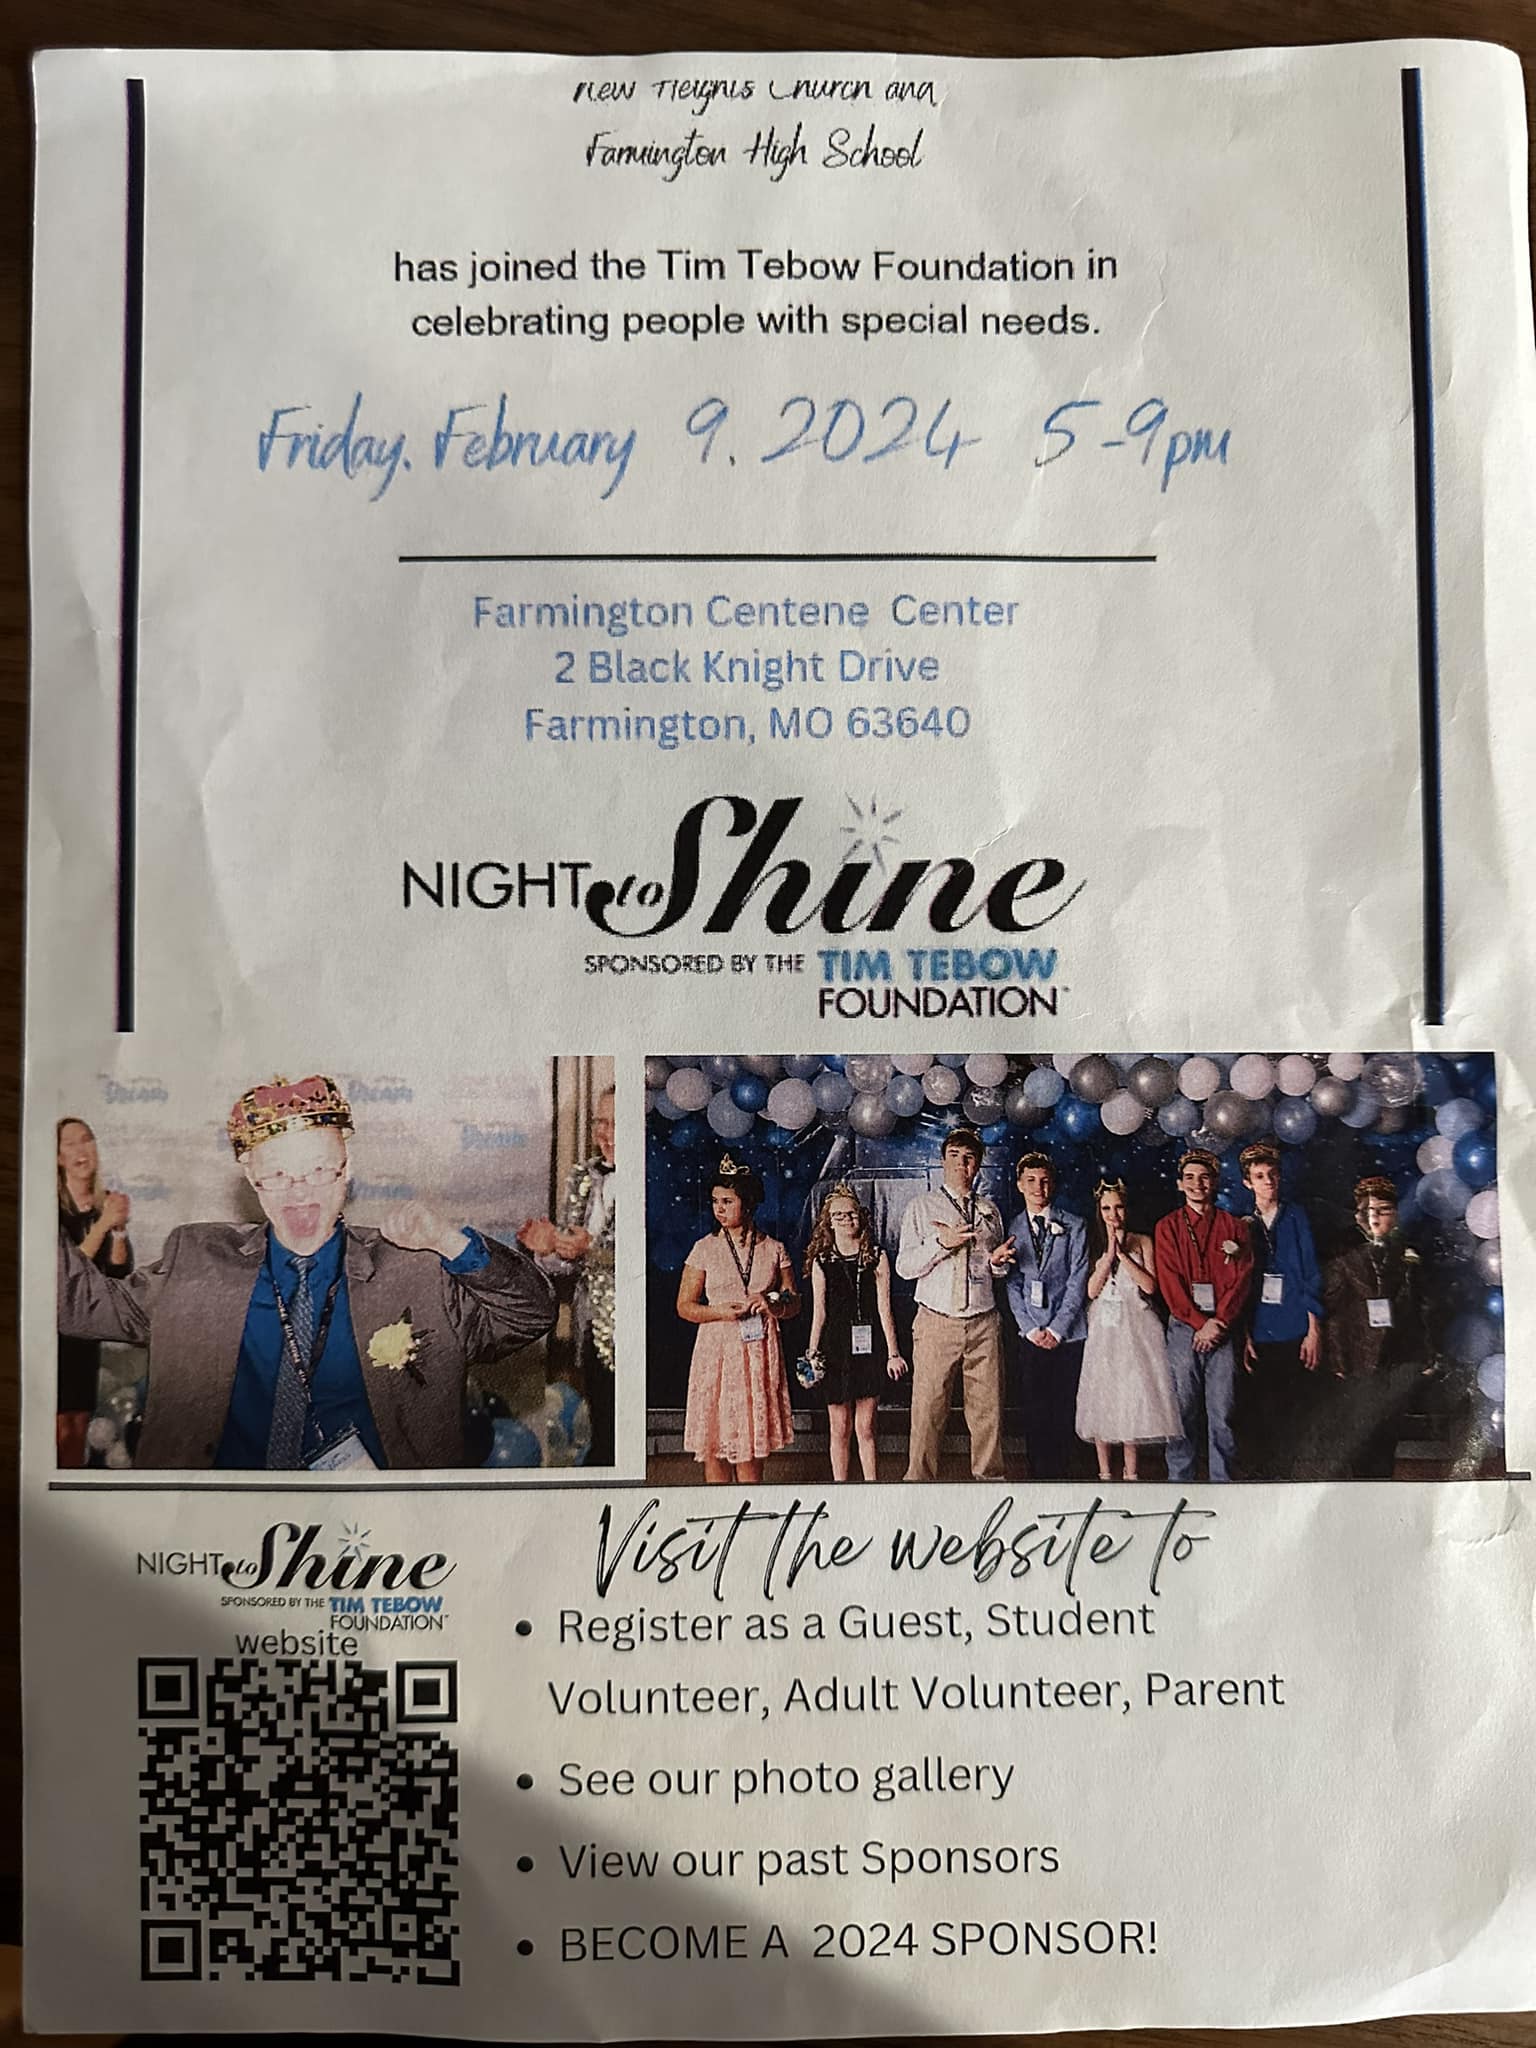 Night to Shine is Dream Prom